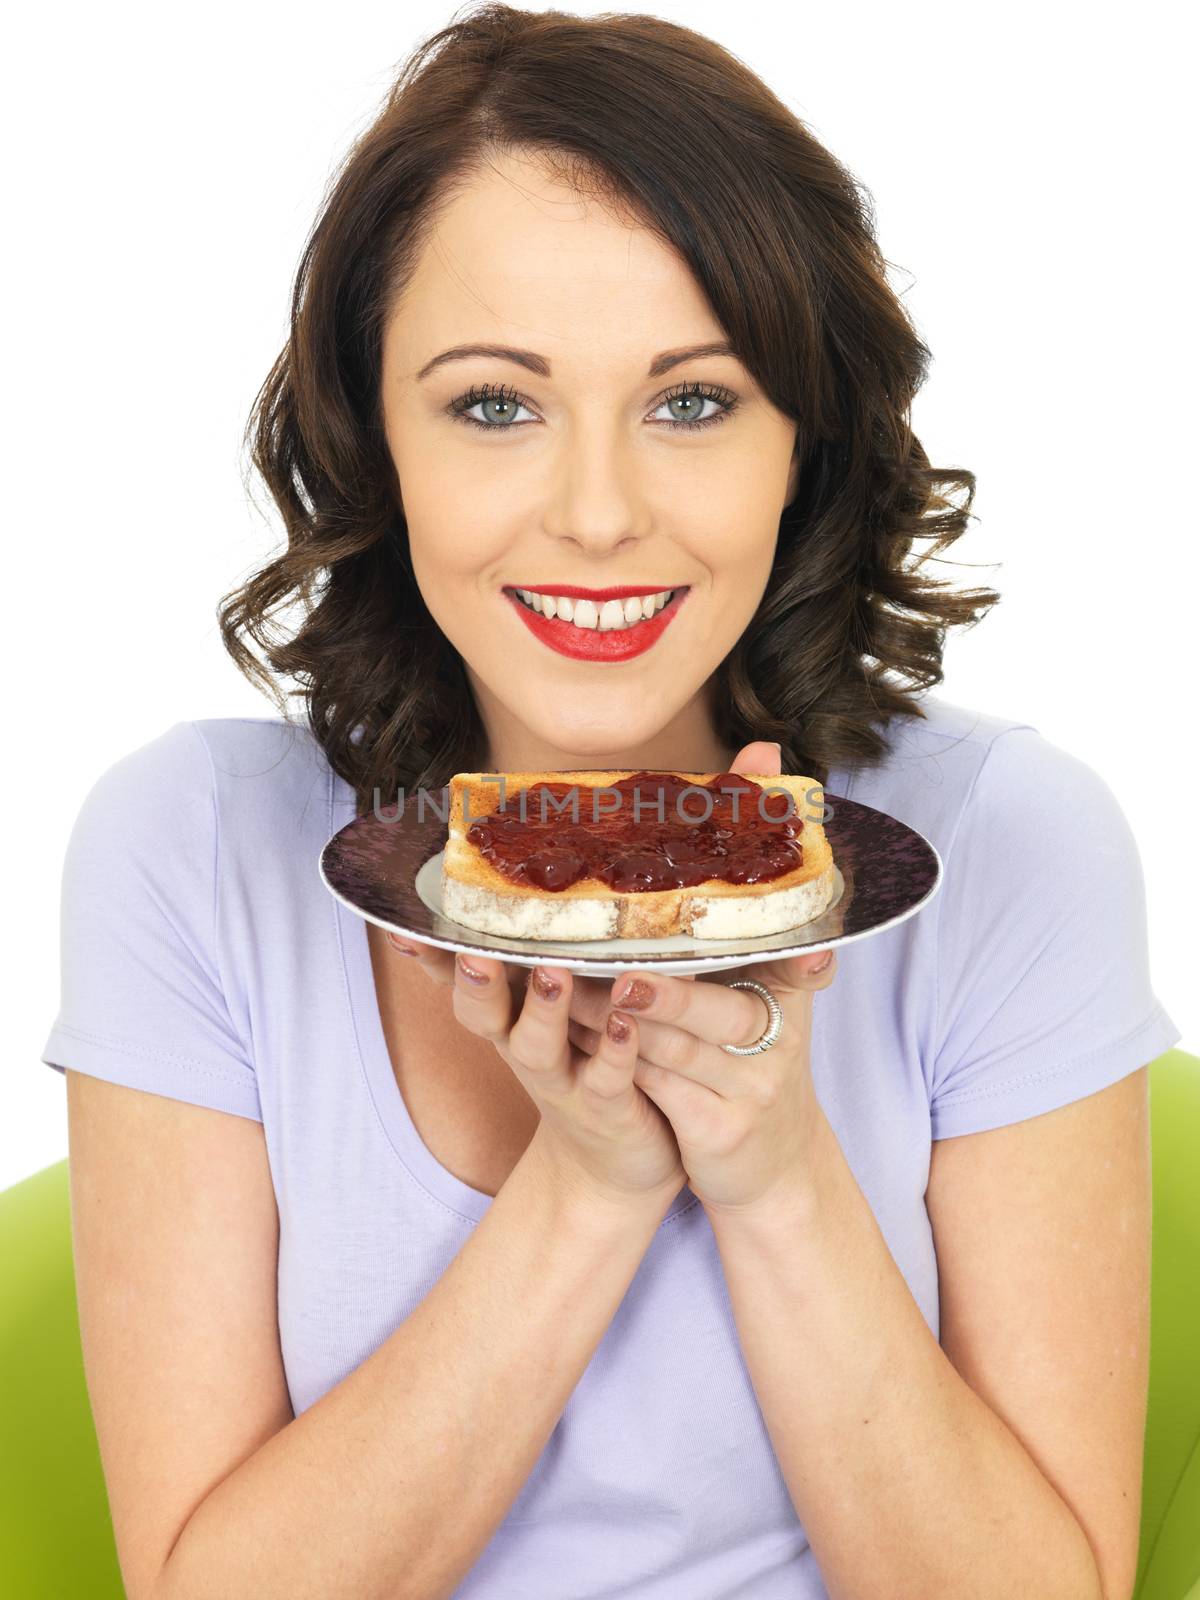 Young Woman With Strawberry Jam on Toast by Whiteboxmedia